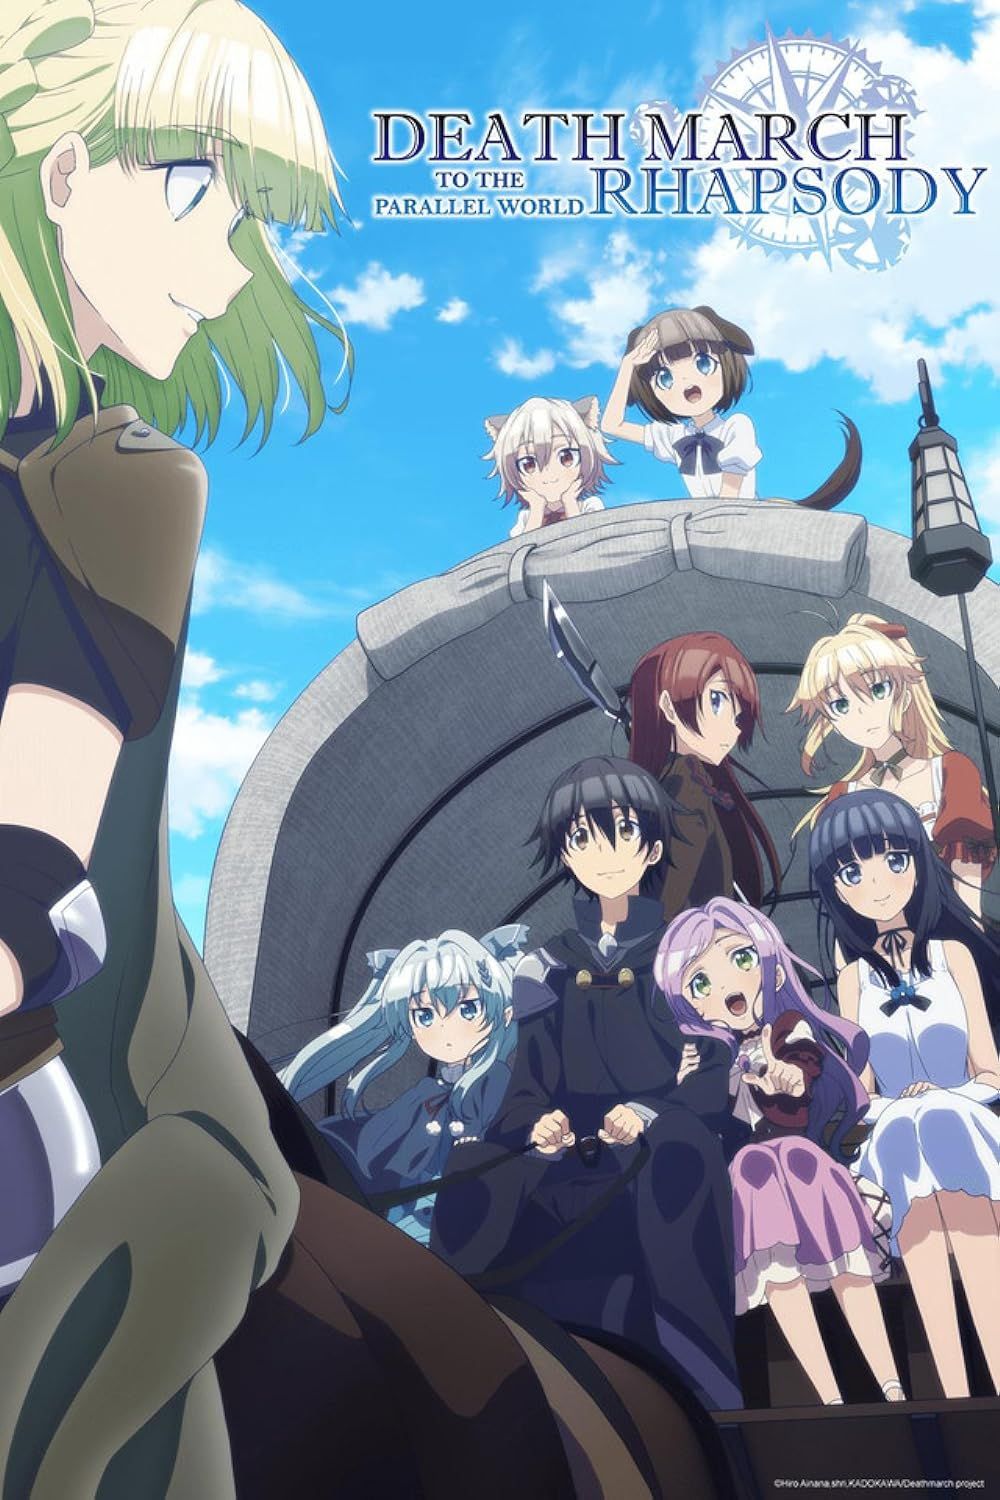 Death March to the Parallel World Rhapsody (2018) anime characters in poster